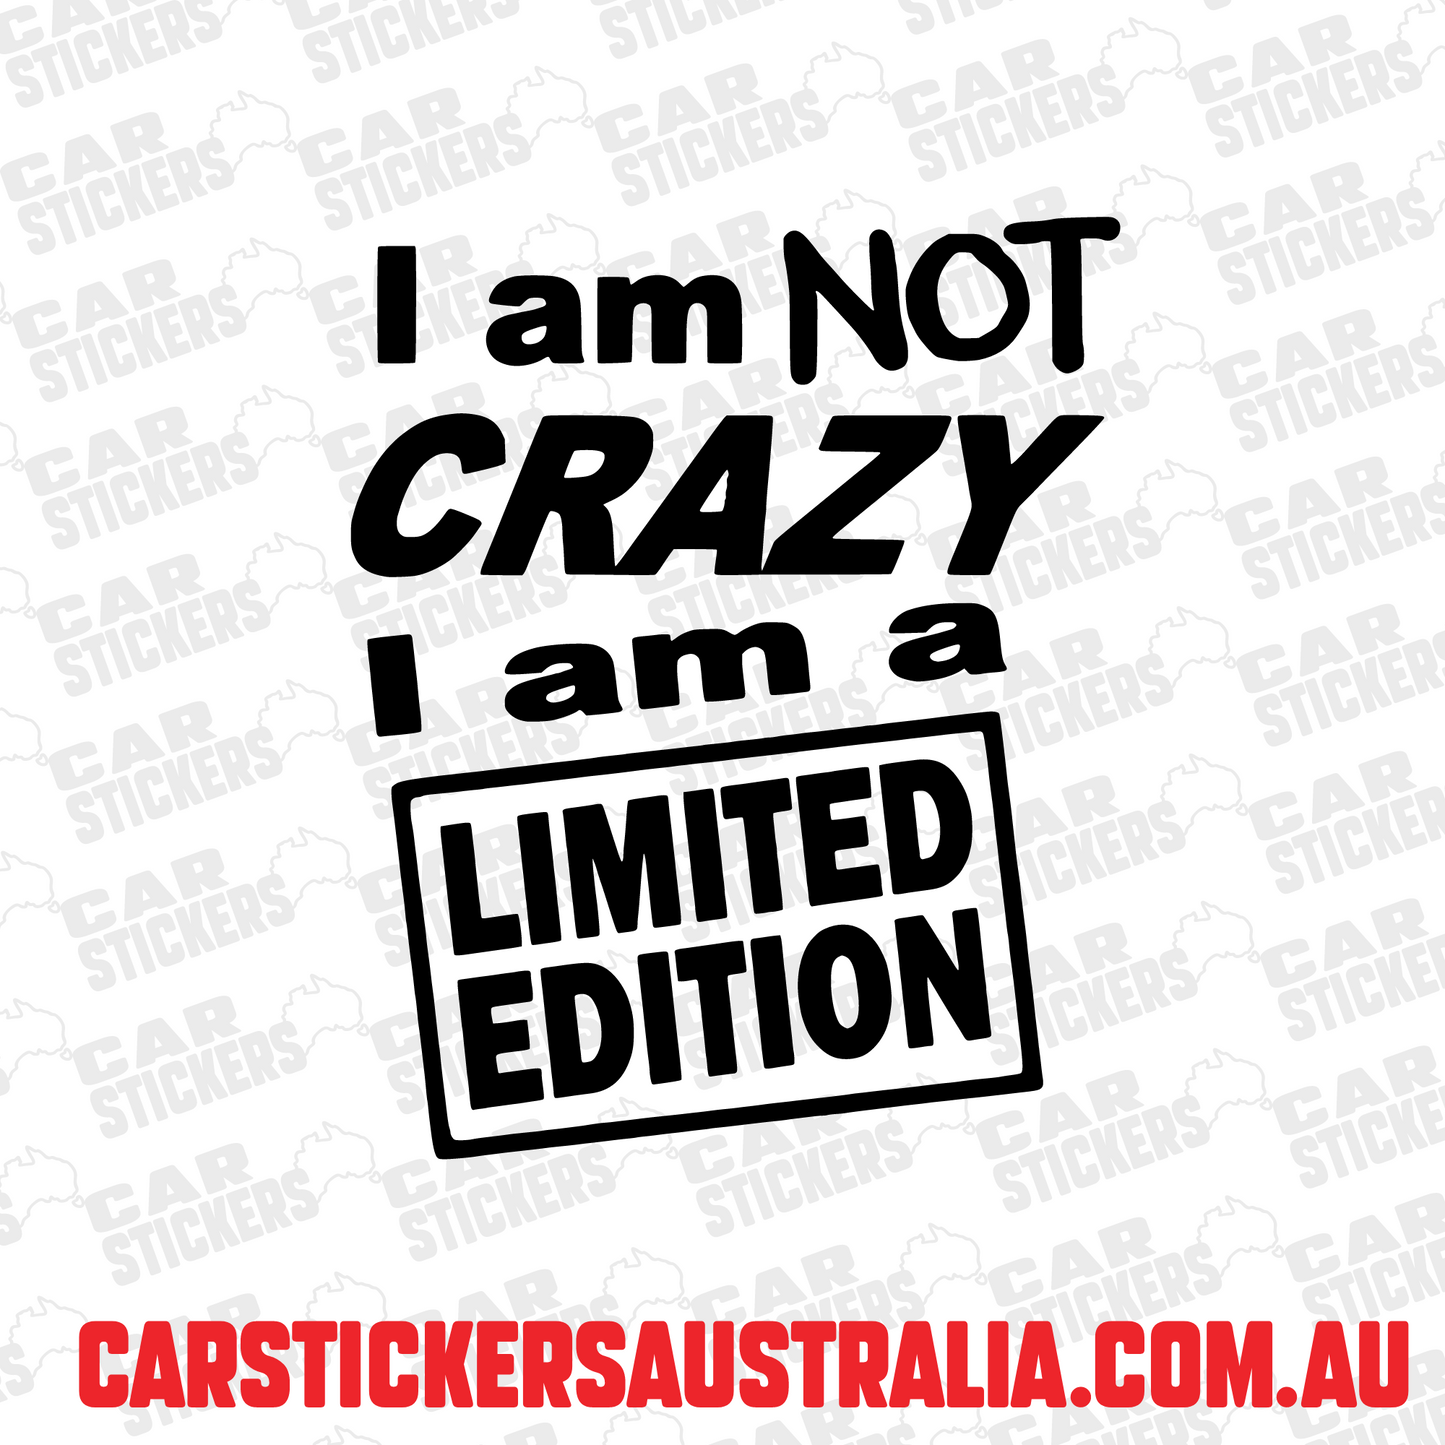 I Am Not Crazy, I Am Limited Edition